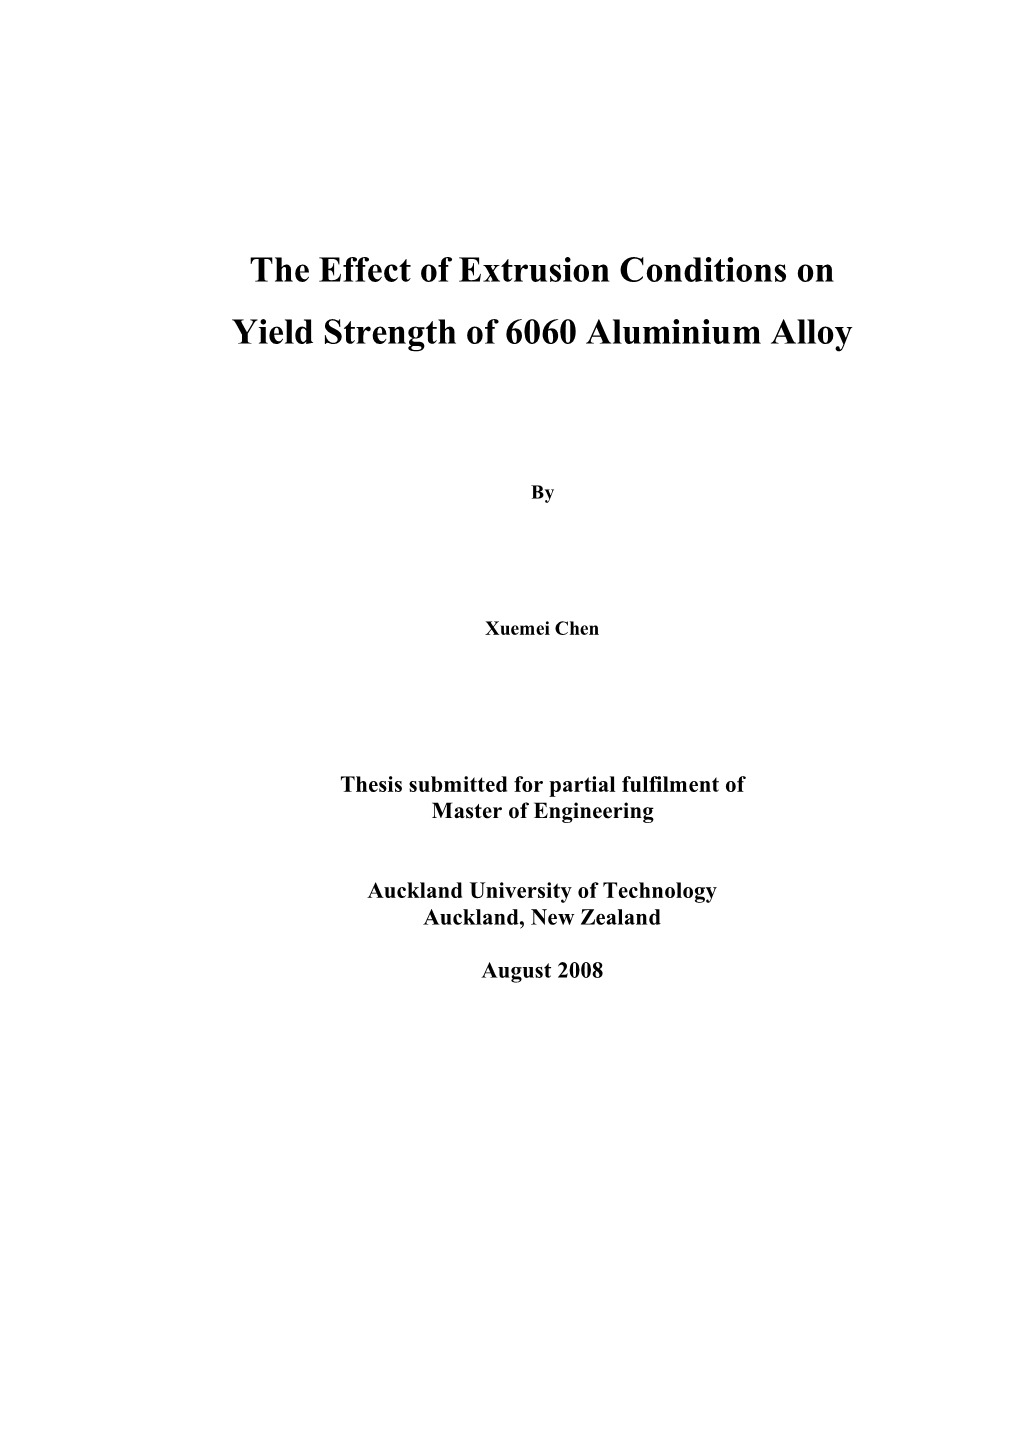 The Effect of Extrusion Conditions on Yield Strength of 6060 Aluminium Alloy